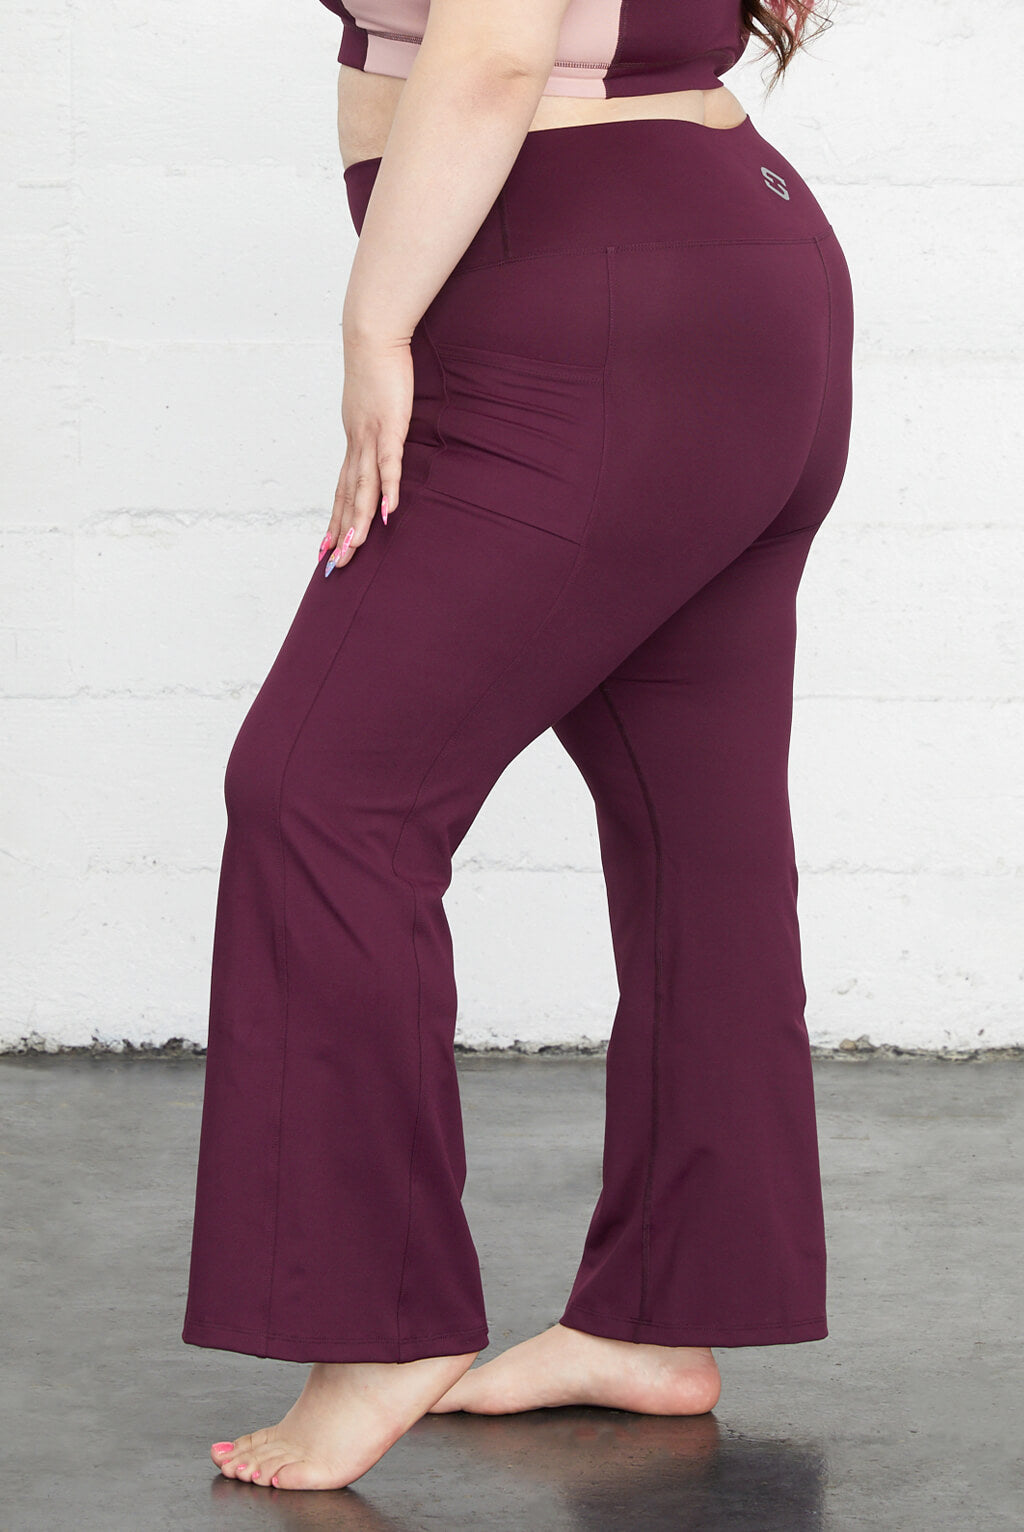 Maroon Compressive Leggings with Pockets That Don't Roll Down